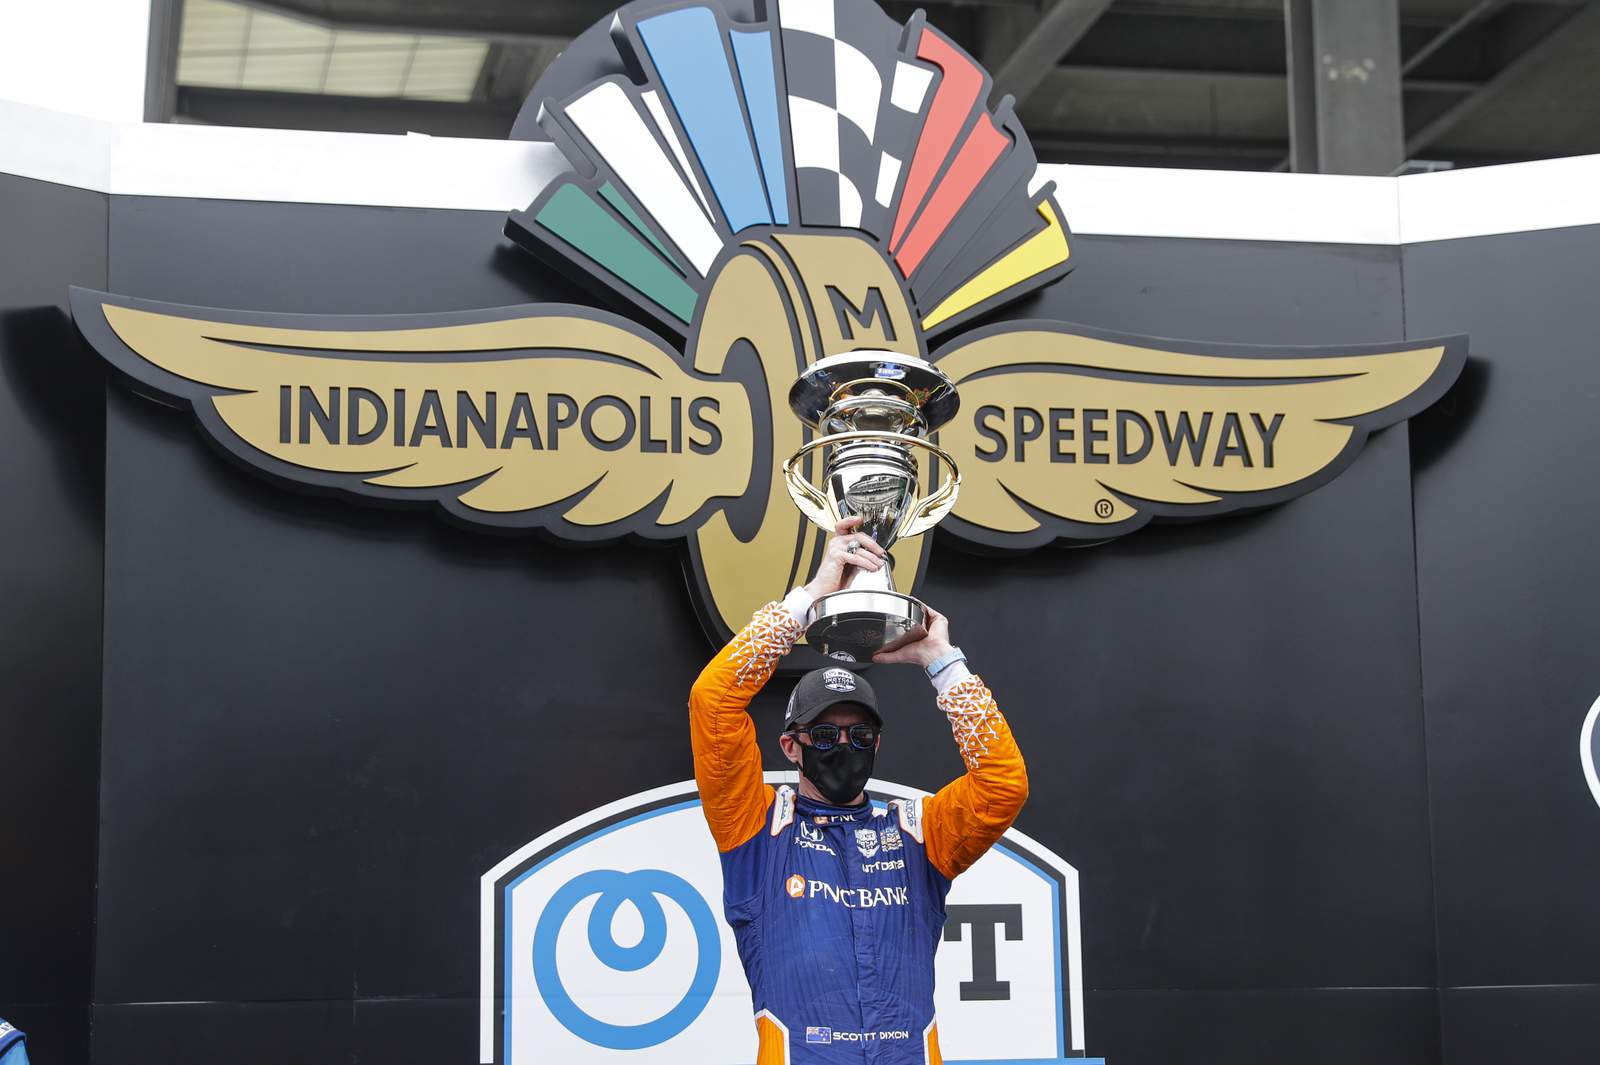 Dixon breaks through at Indianapolis with victory in GP